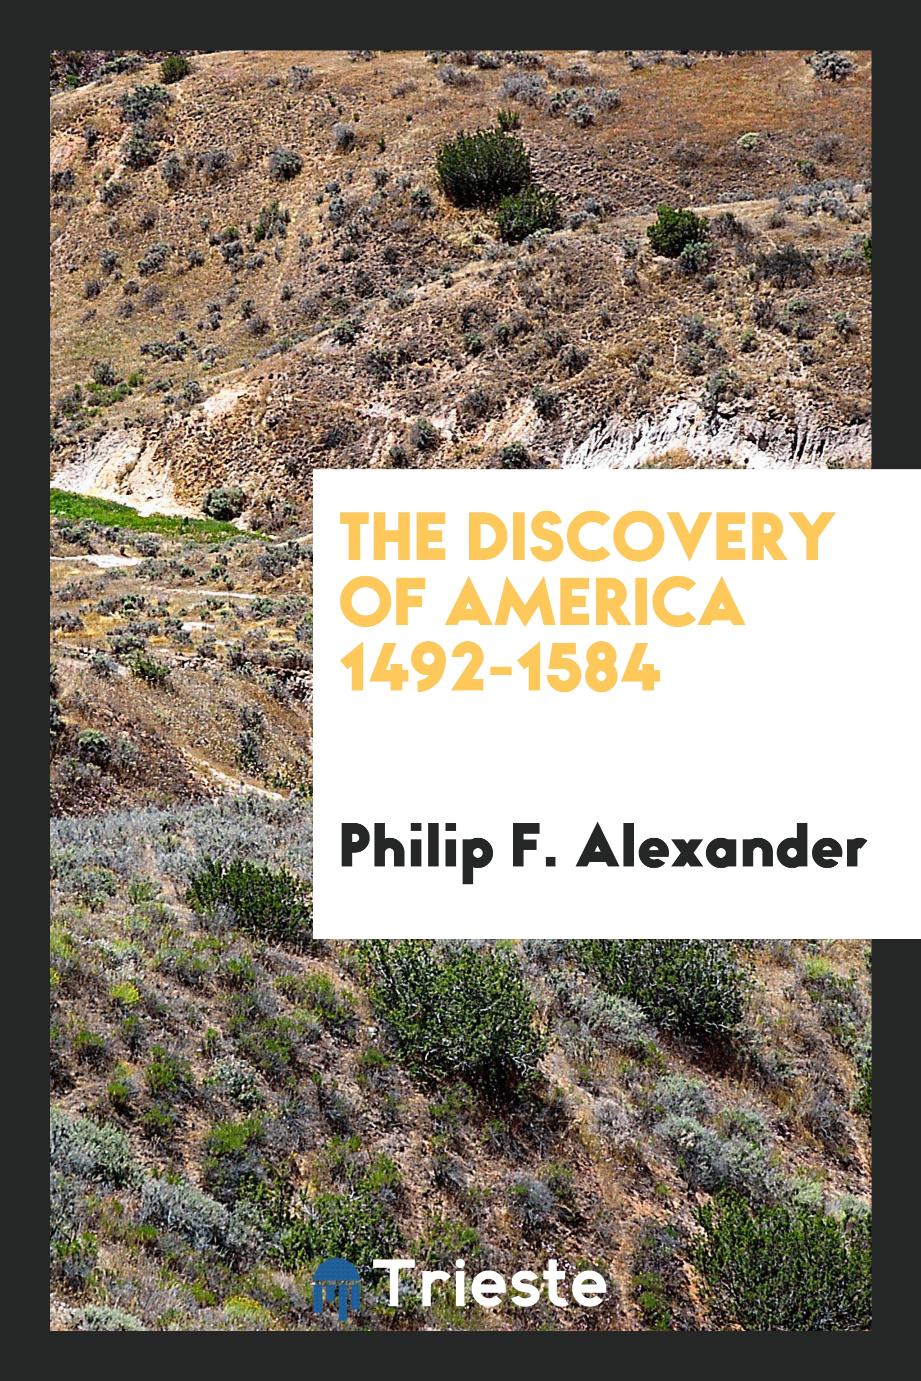 The discovery of America 1492-1584